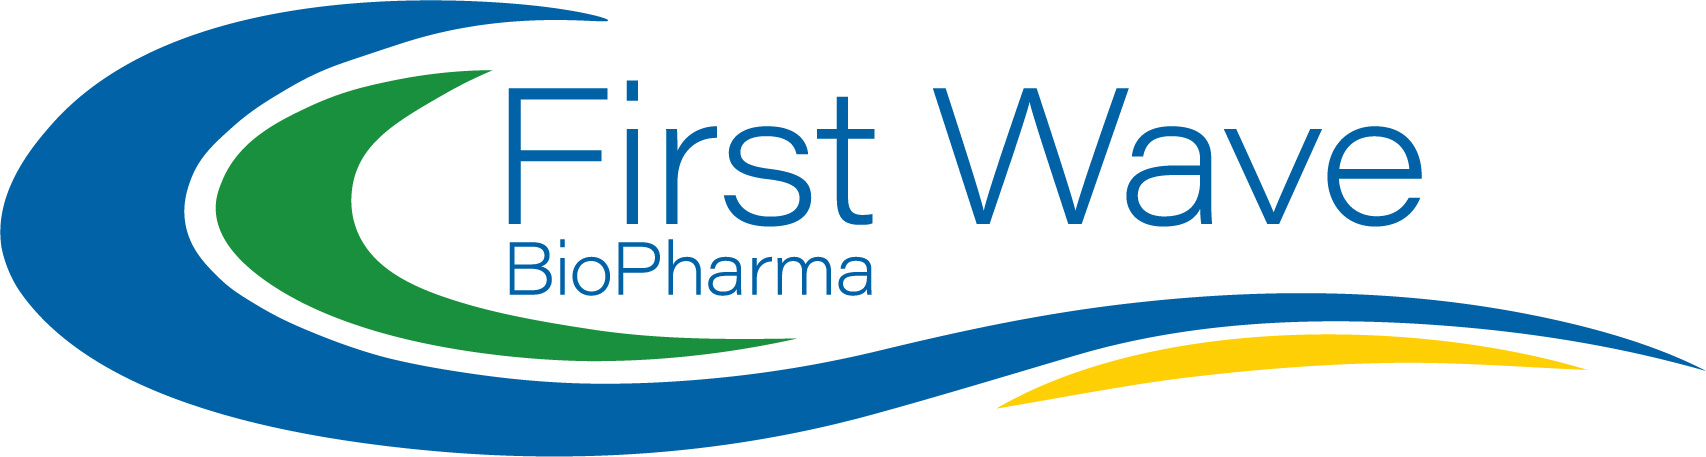 First Wave BioPharma, Inc. Announces $9 Million Registered Direct Offering Priced At-The-Market Under NASDAQ Rules